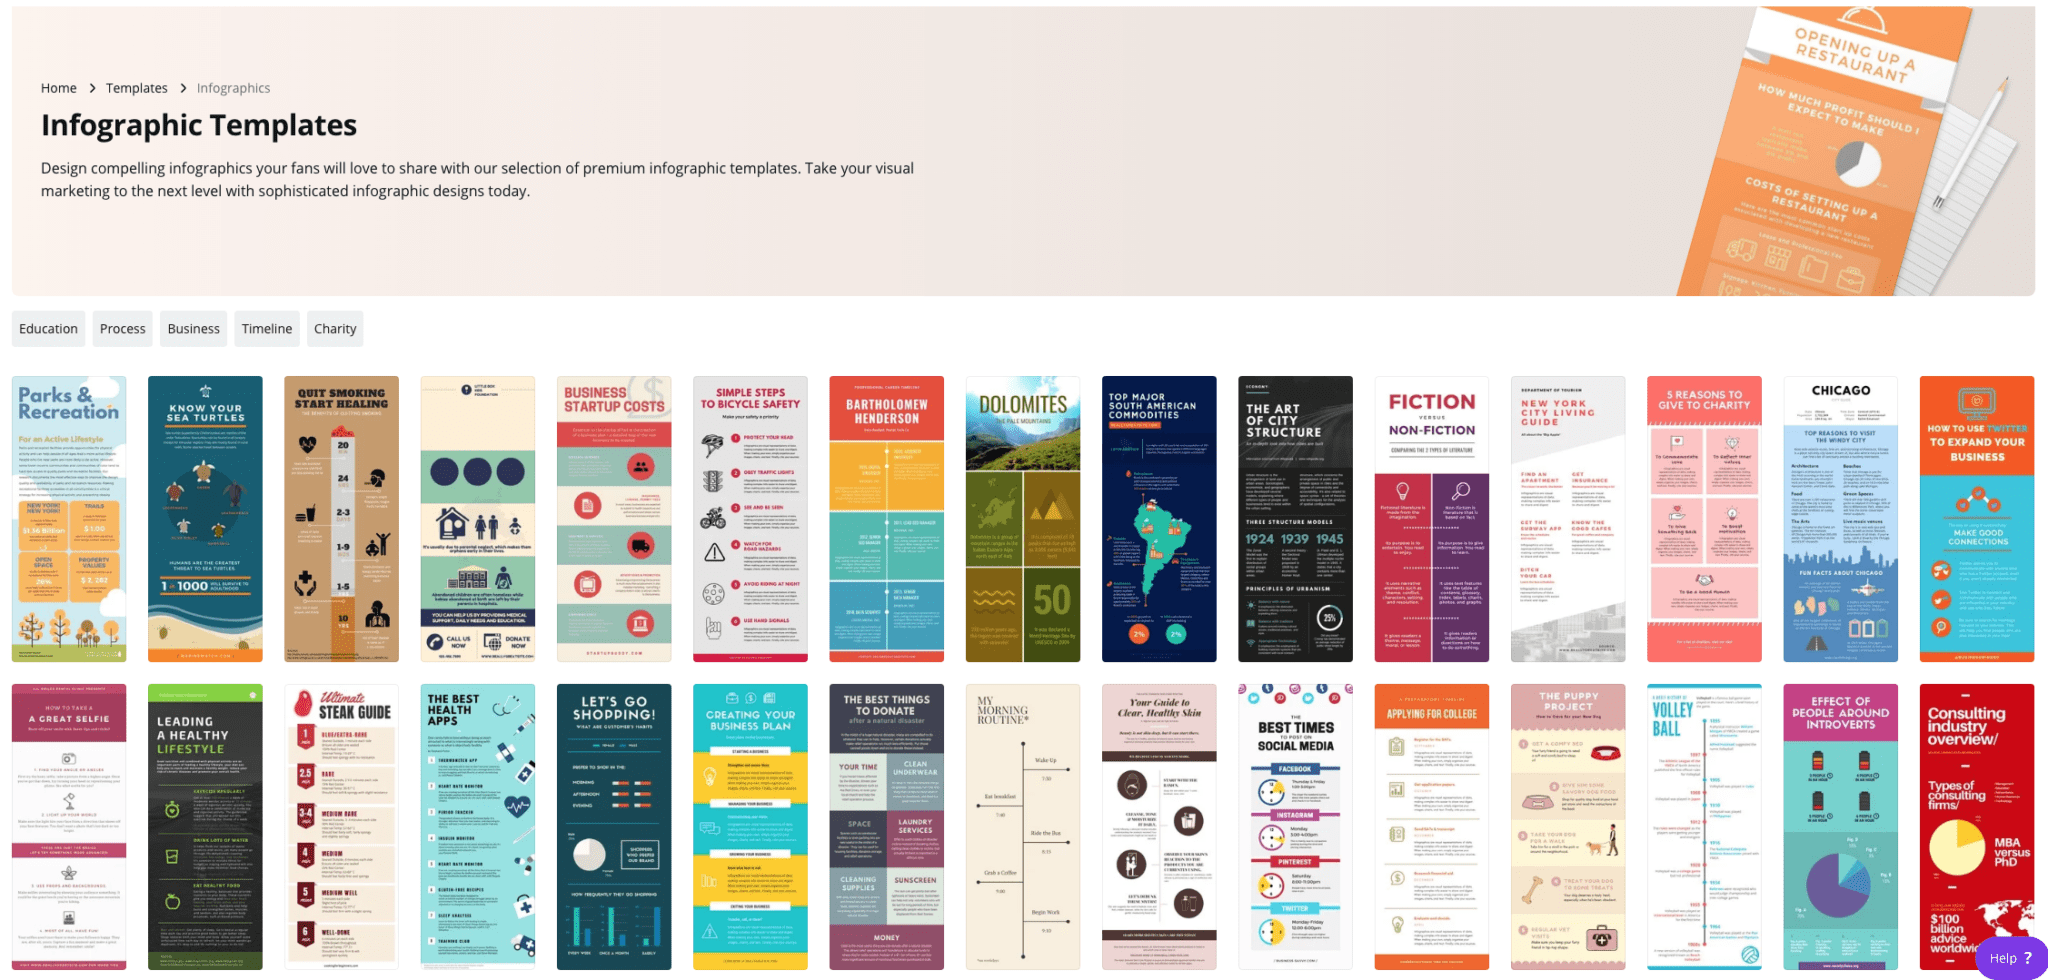 Customize 23+ Timeline Infographic templates online - Canva